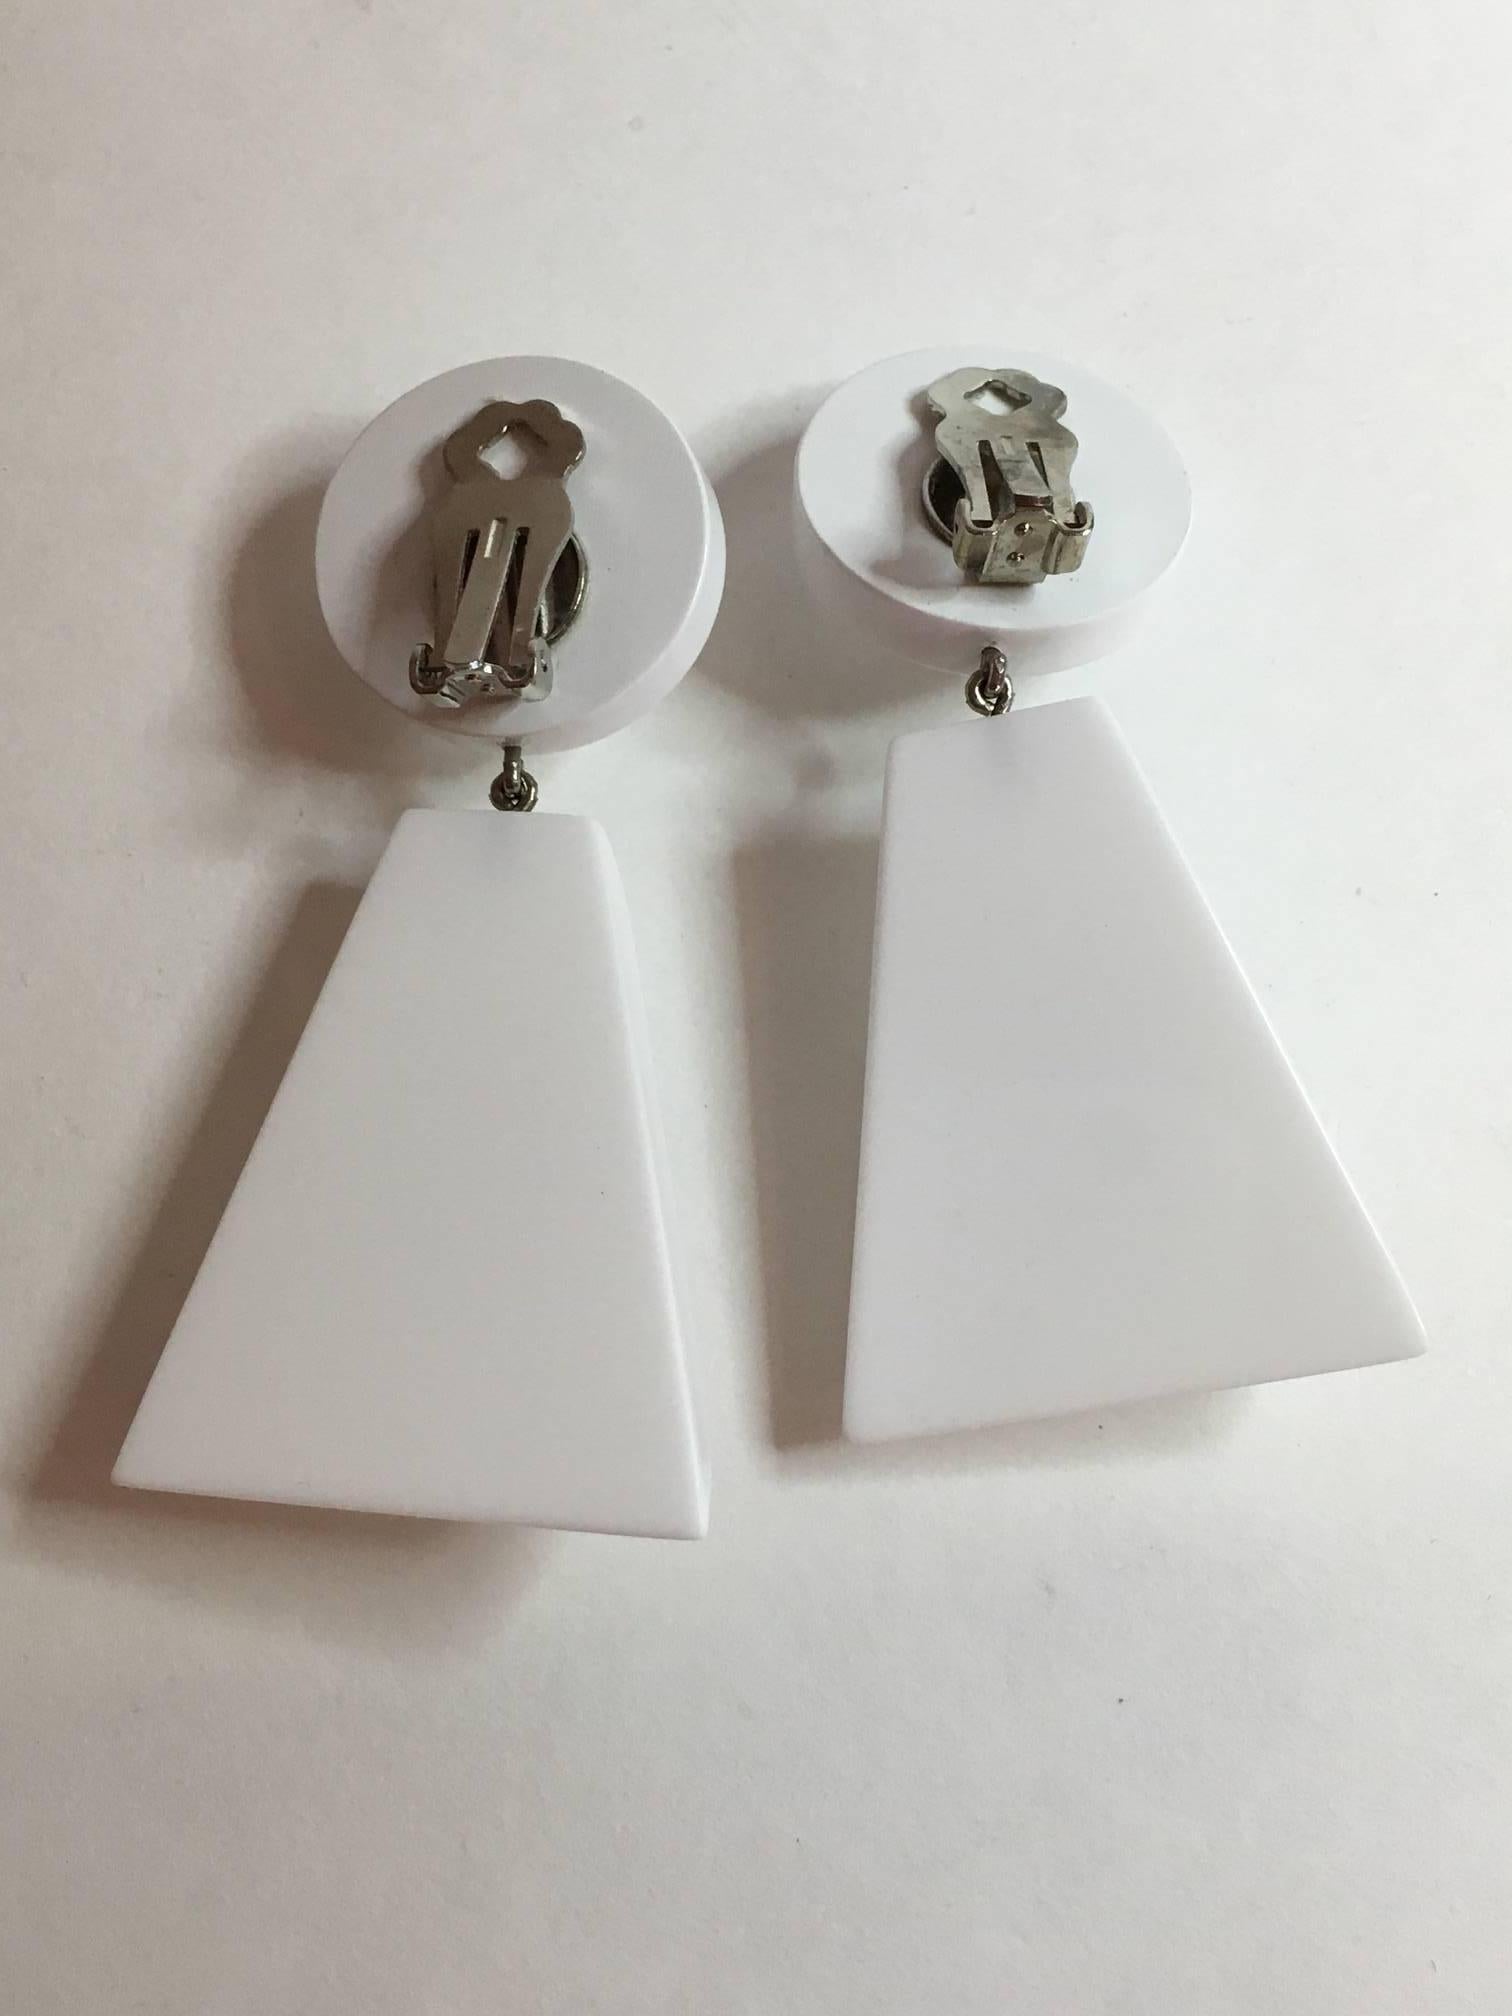 These lovelywhite acrylic earrings with white disc tops with circular rhinestone detail suspend trapezoidal white acrylic drops. The discs are under 1